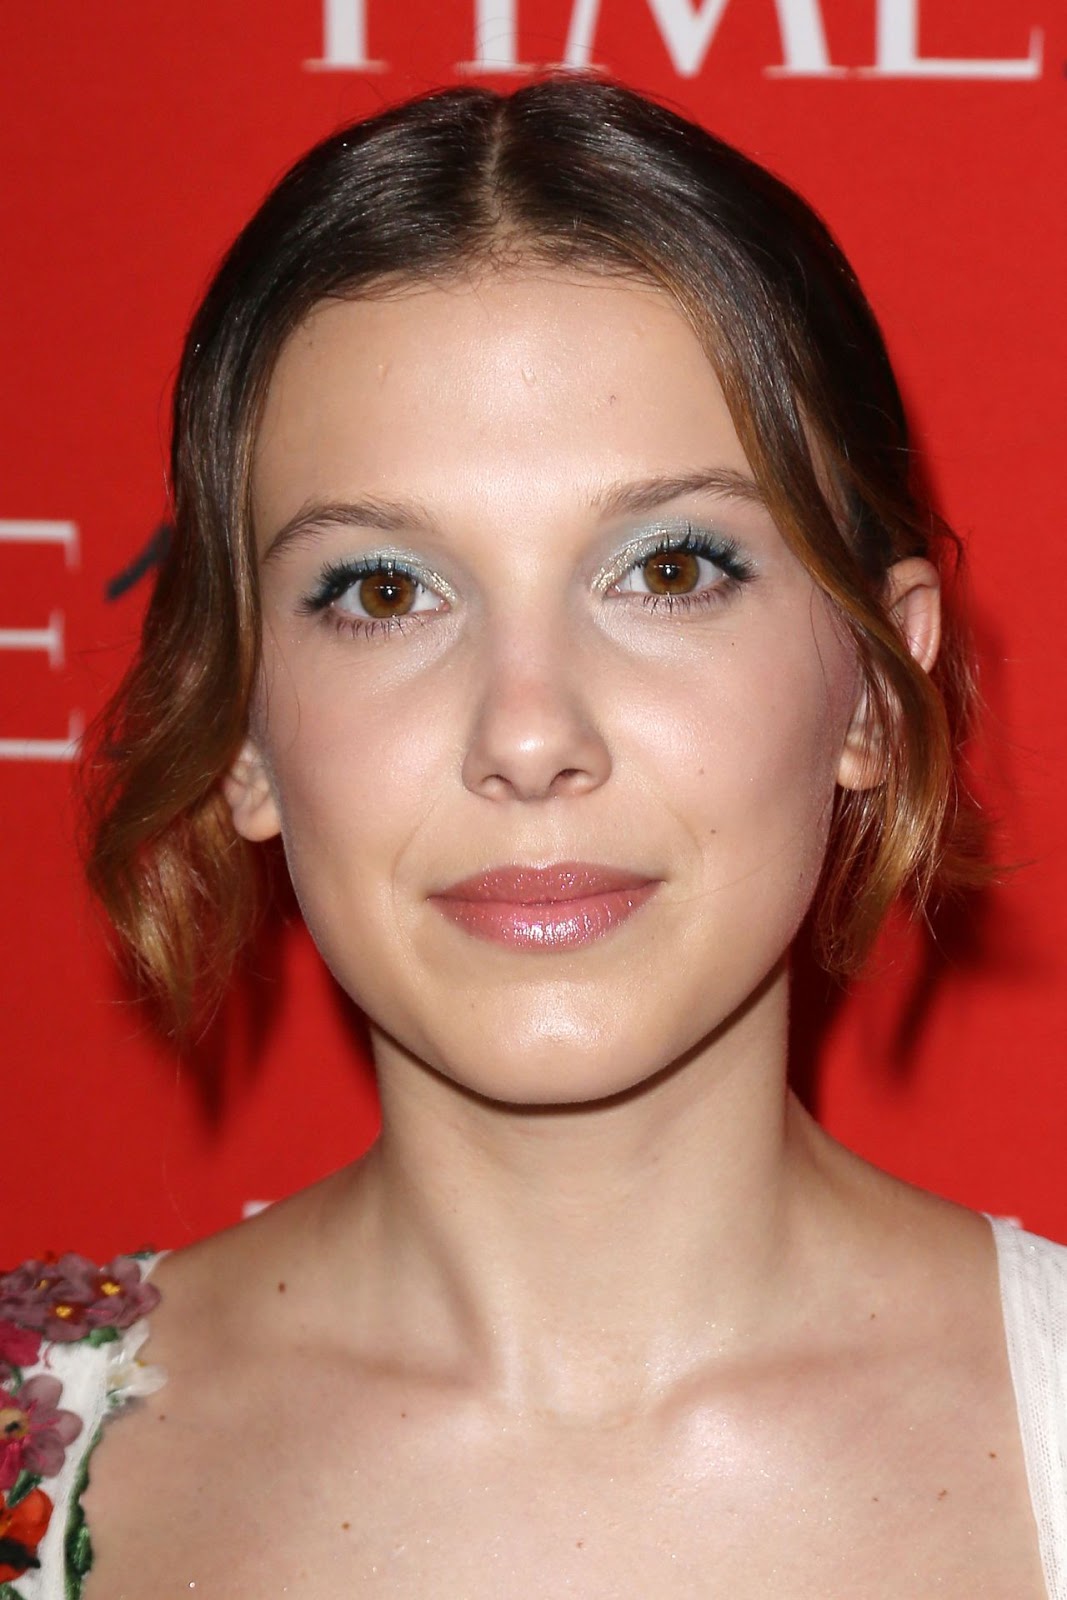 From Stranger Things To Hollywood's Elite: The Story Of Millie Bobby Brown